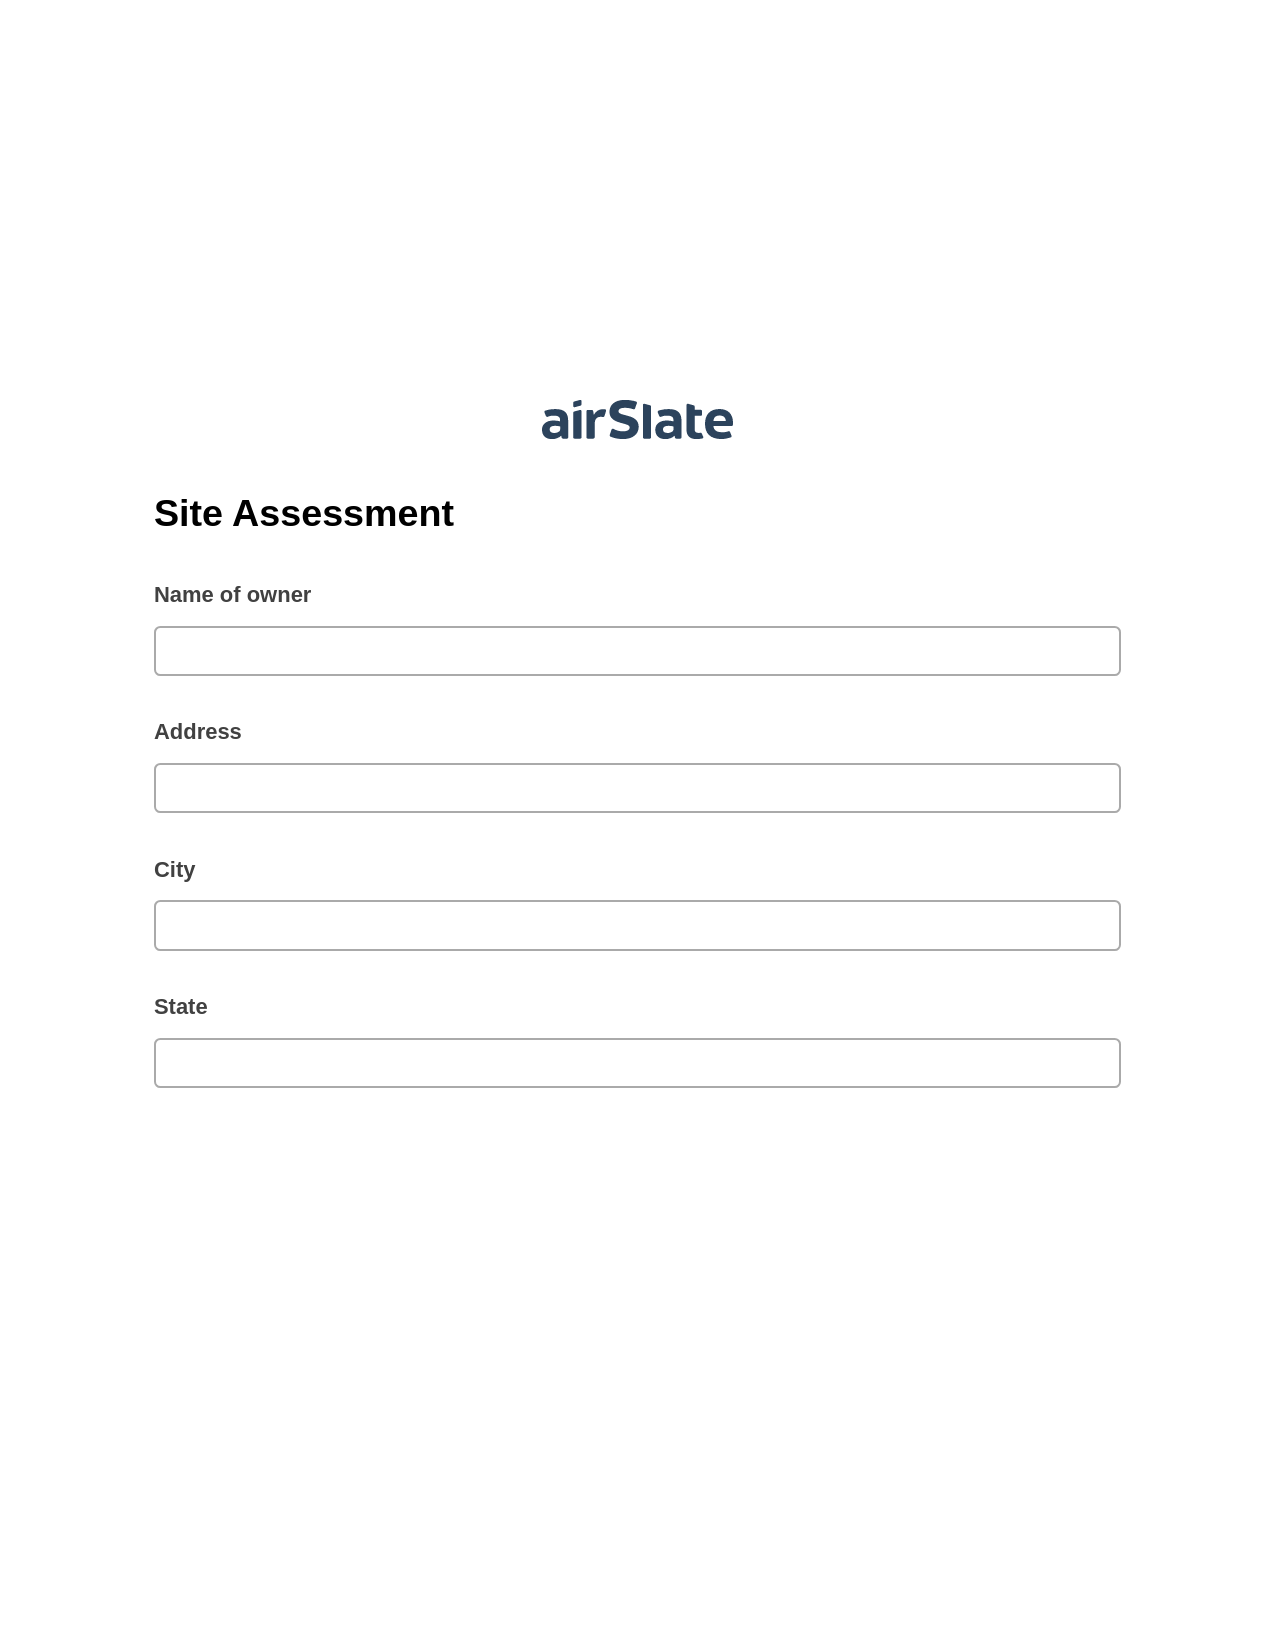 Site Assessment Pre-fill Slate from MS Dynamics 365 Records Bot, Assign Roles to Recipients Bot, OneDrive Bot